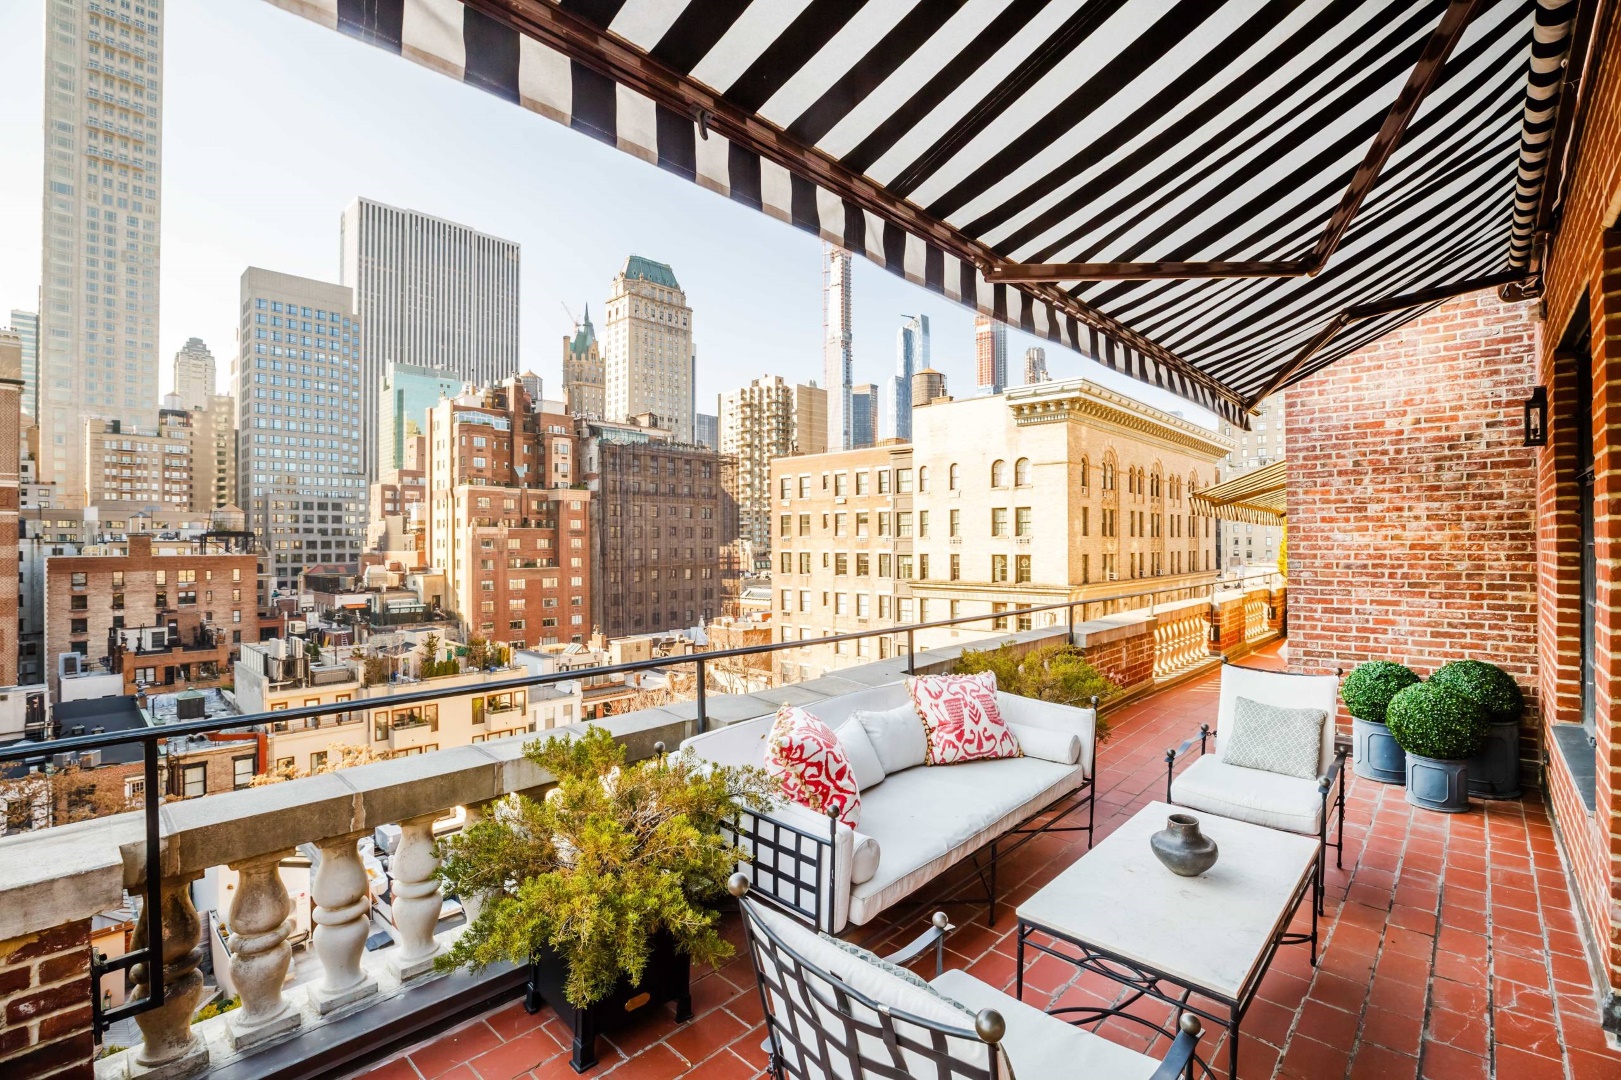 15 Gorgeous Transitional Balcony Designs to Enjoy Your View in Style